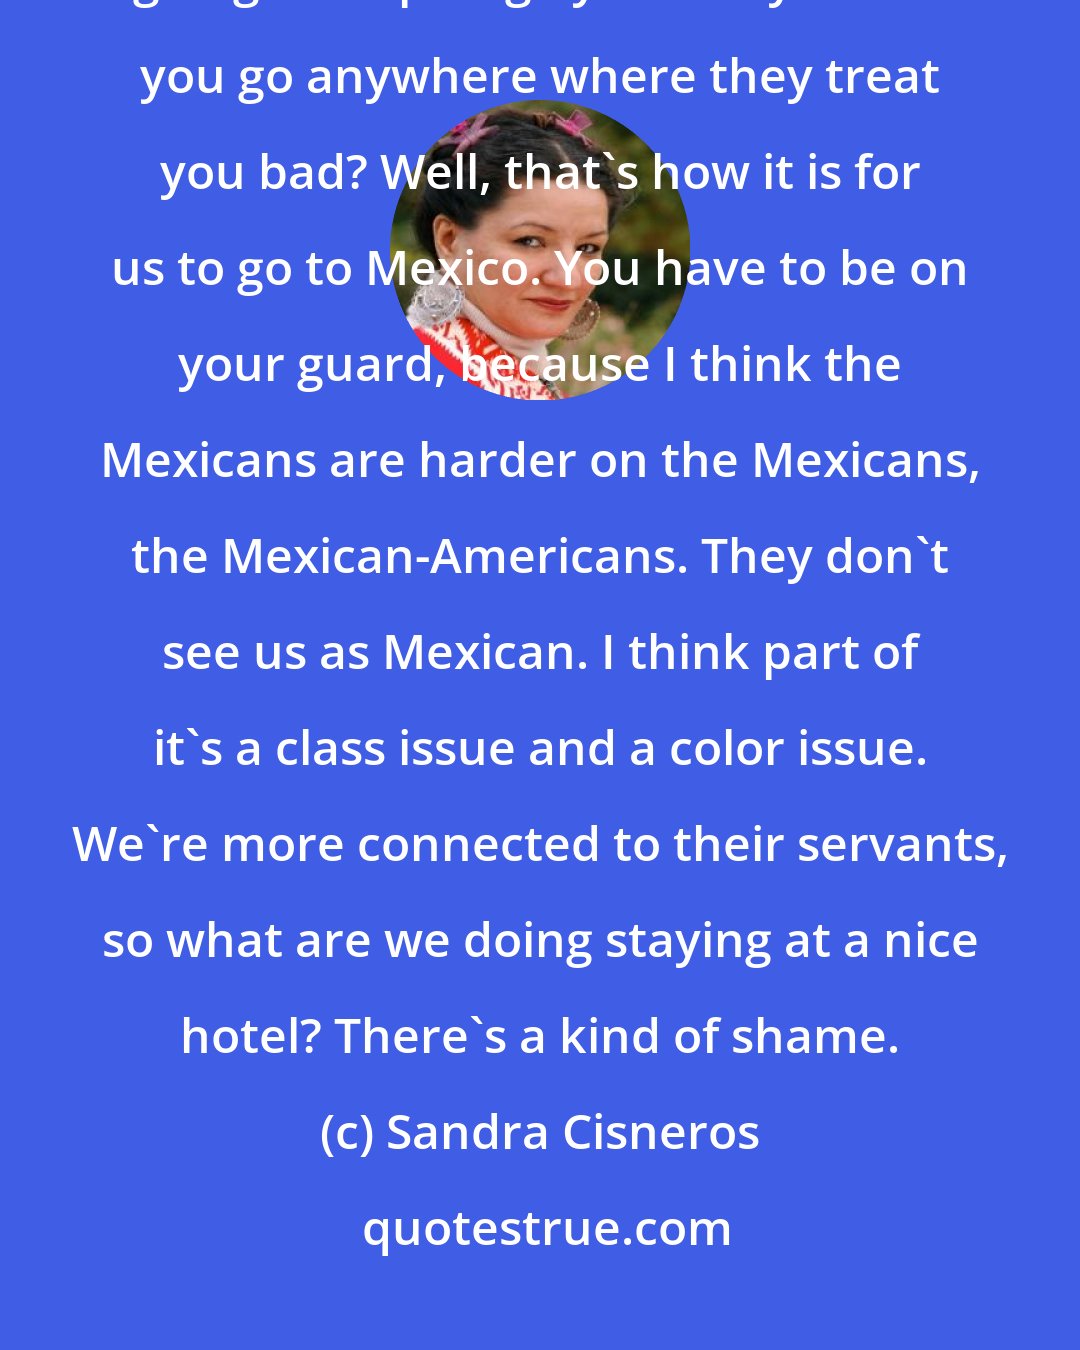 Sandra Cisneros: Imagine Americans who go to Paris. Why would you want to go where someone's going to disparage you? Why would you go anywhere where they treat you bad? Well, that's how it is for us to go to Mexico. You have to be on your guard, because I think the Mexicans are harder on the Mexicans, the Mexican-Americans. They don't see us as Mexican. I think part of it's a class issue and a color issue. We're more connected to their servants, so what are we doing staying at a nice hotel? There's a kind of shame.